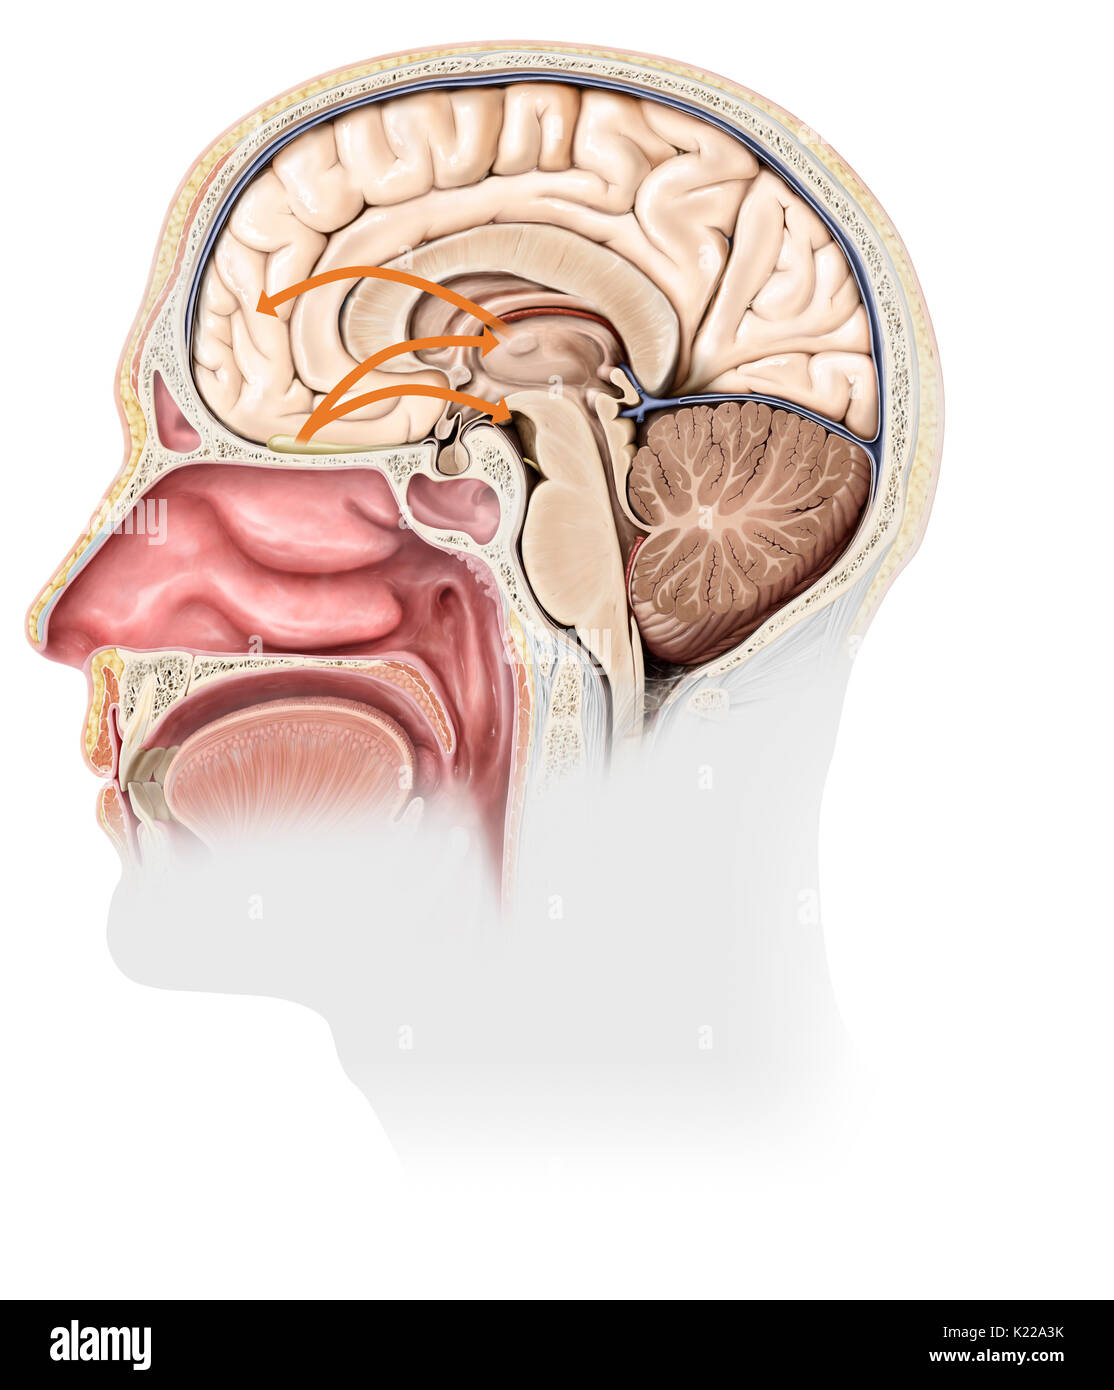 Each nasal cavity encloses an olfactory epithelium, whose stimulation by odorous molecules generates nerve signals. These are routed to the brain, where the odors are analyzed and associated with emotions and memories. Stock Photo